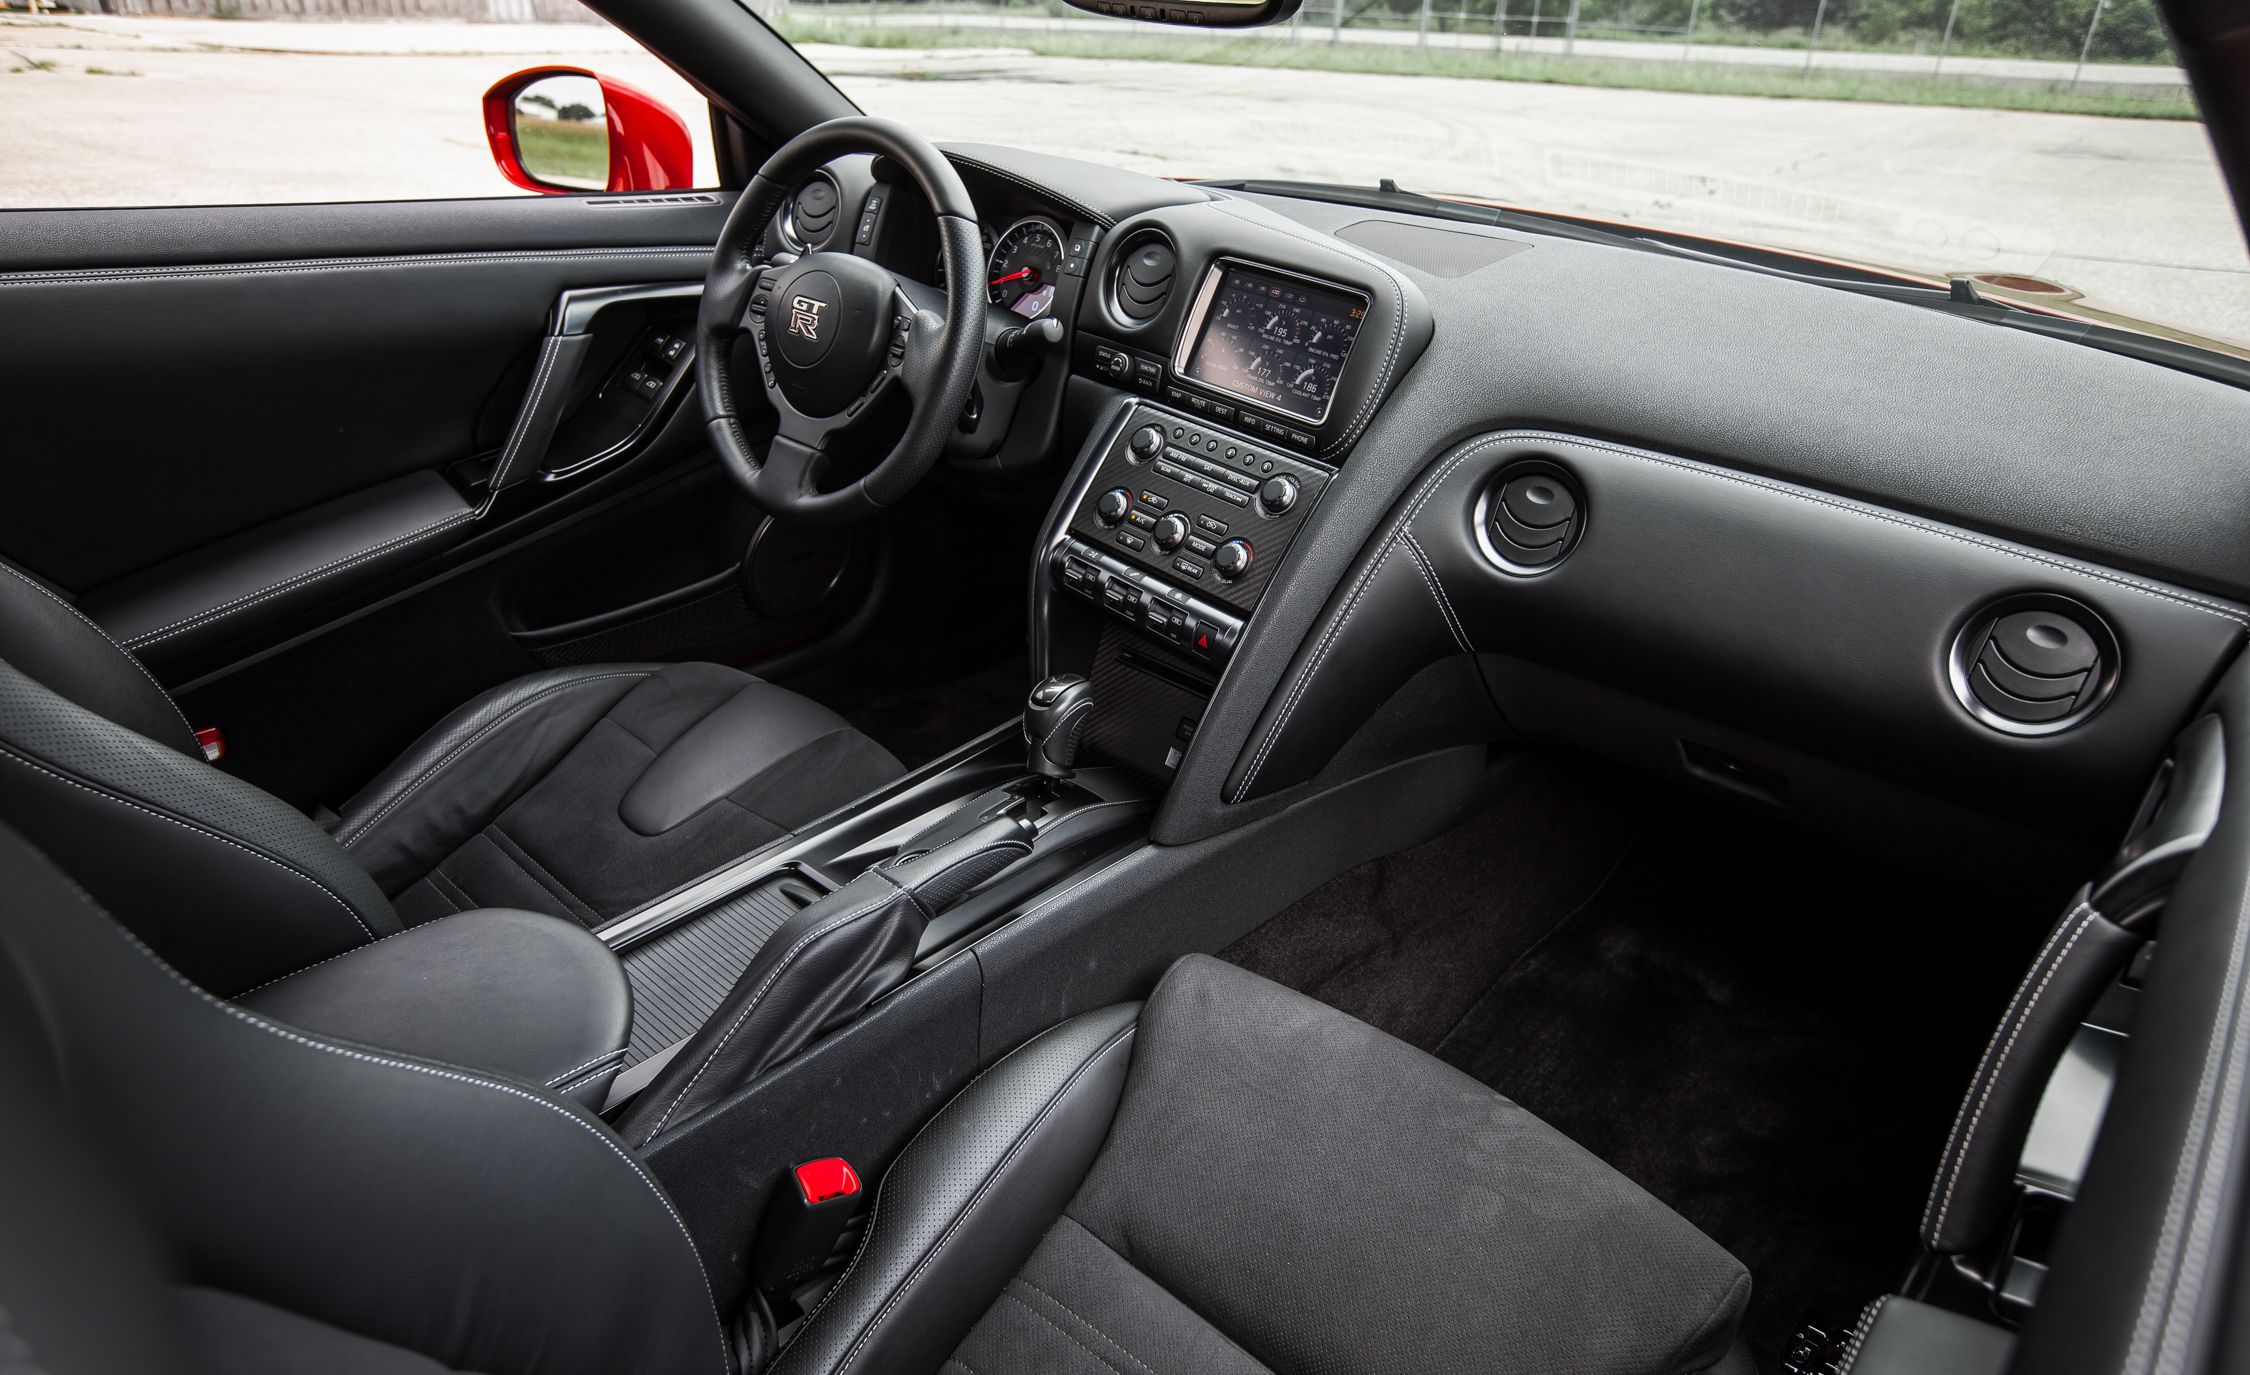 2015 Nissan Gt R Interior (View 12 of 25)